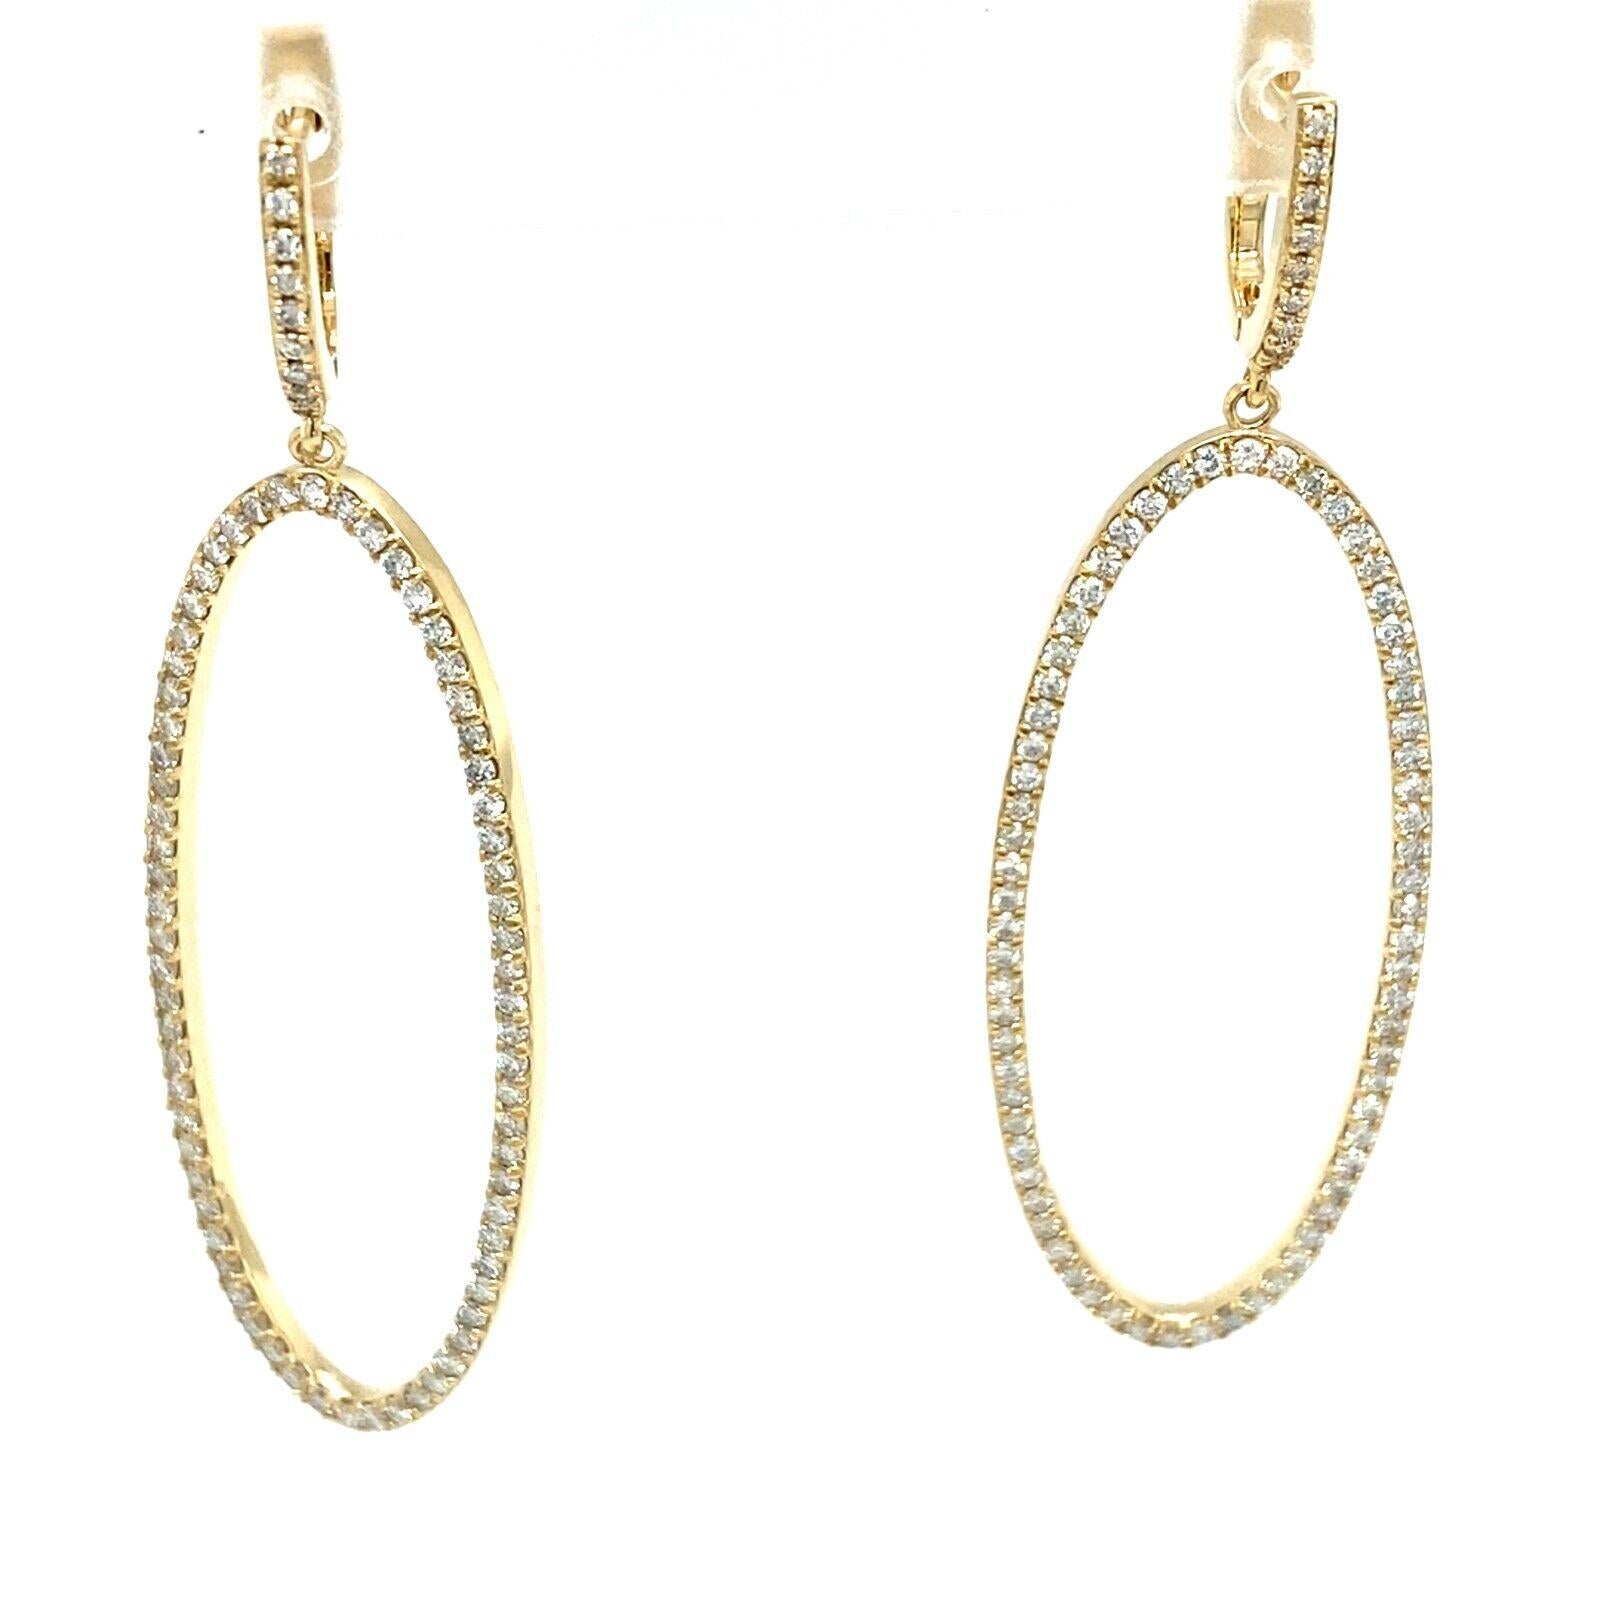 The earrings are made of 18ct Yellow Gold, set with 1.10 carats of Diamonds. This pair of earrings is an elegant, timeless pair that will bring your look to the next level.

Additional Information: 
Total Weight: 7g 
Earring Dimension: 58mm x